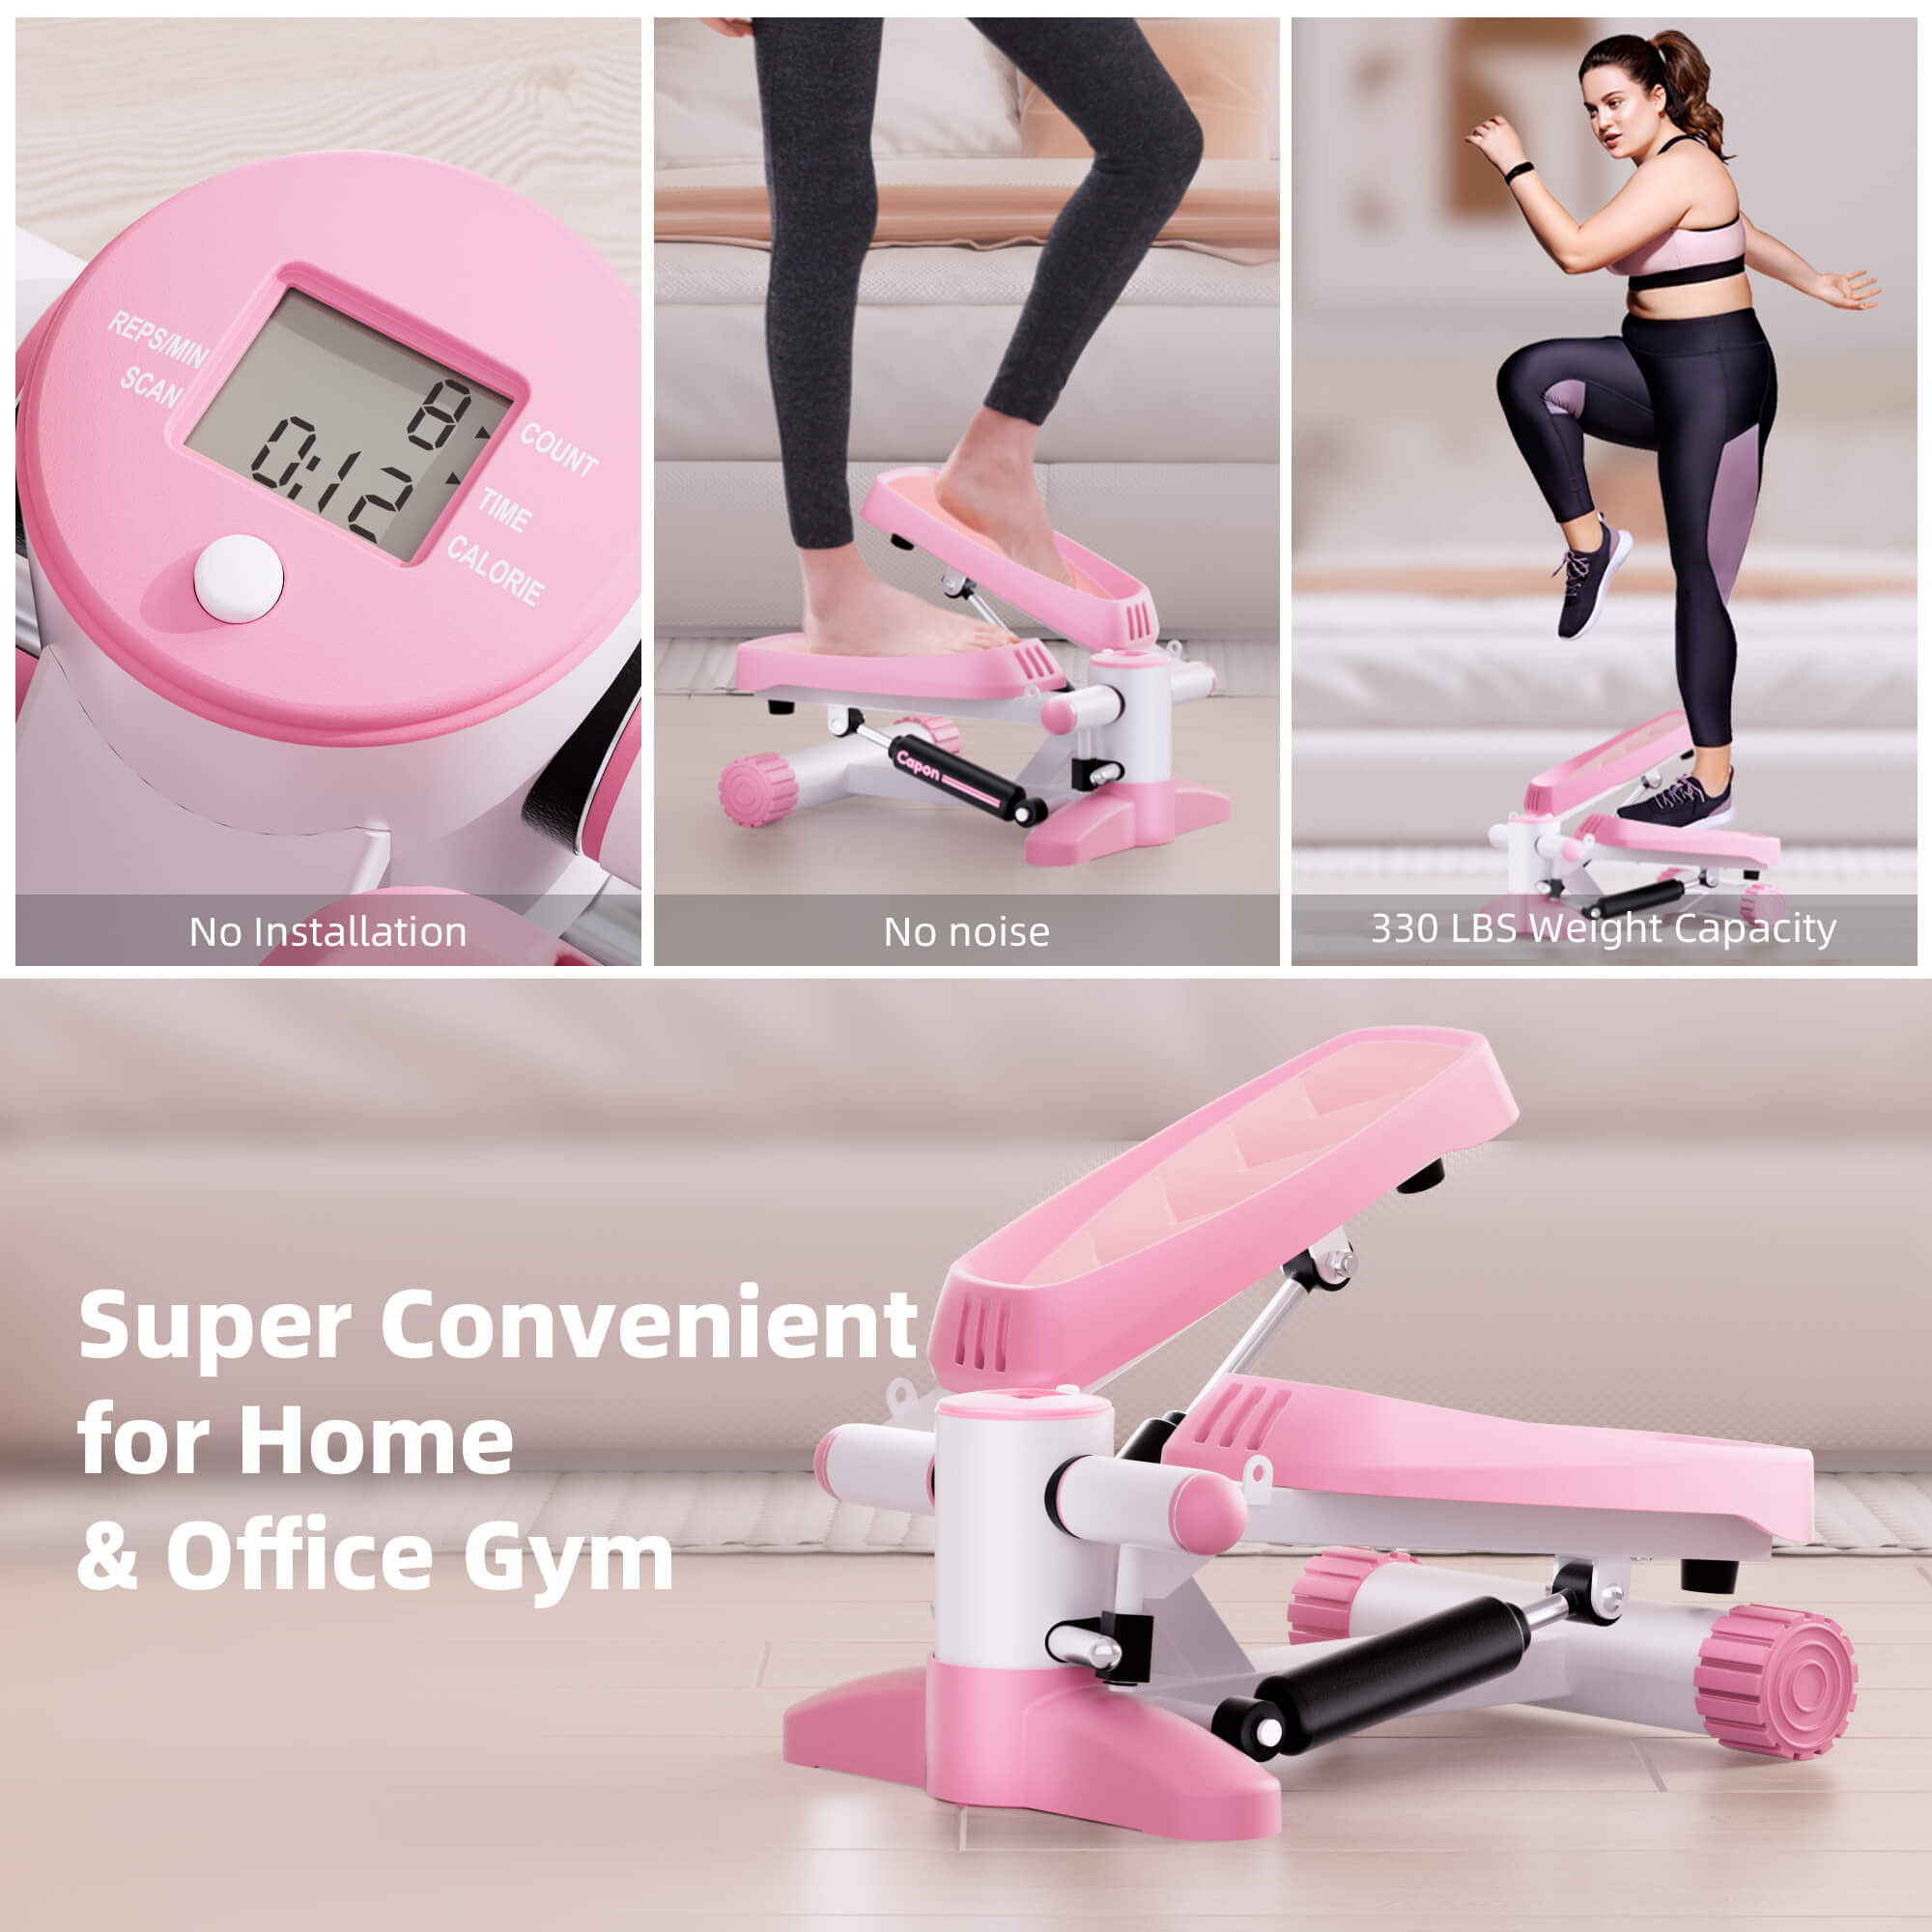  Mini Stepper with Resistance Band, Portable Stair Stepper with  Calories Count, Exercise Stepping Machine for Exercise Fitness Office Home  Workout Equipment : Sports & Outdoors